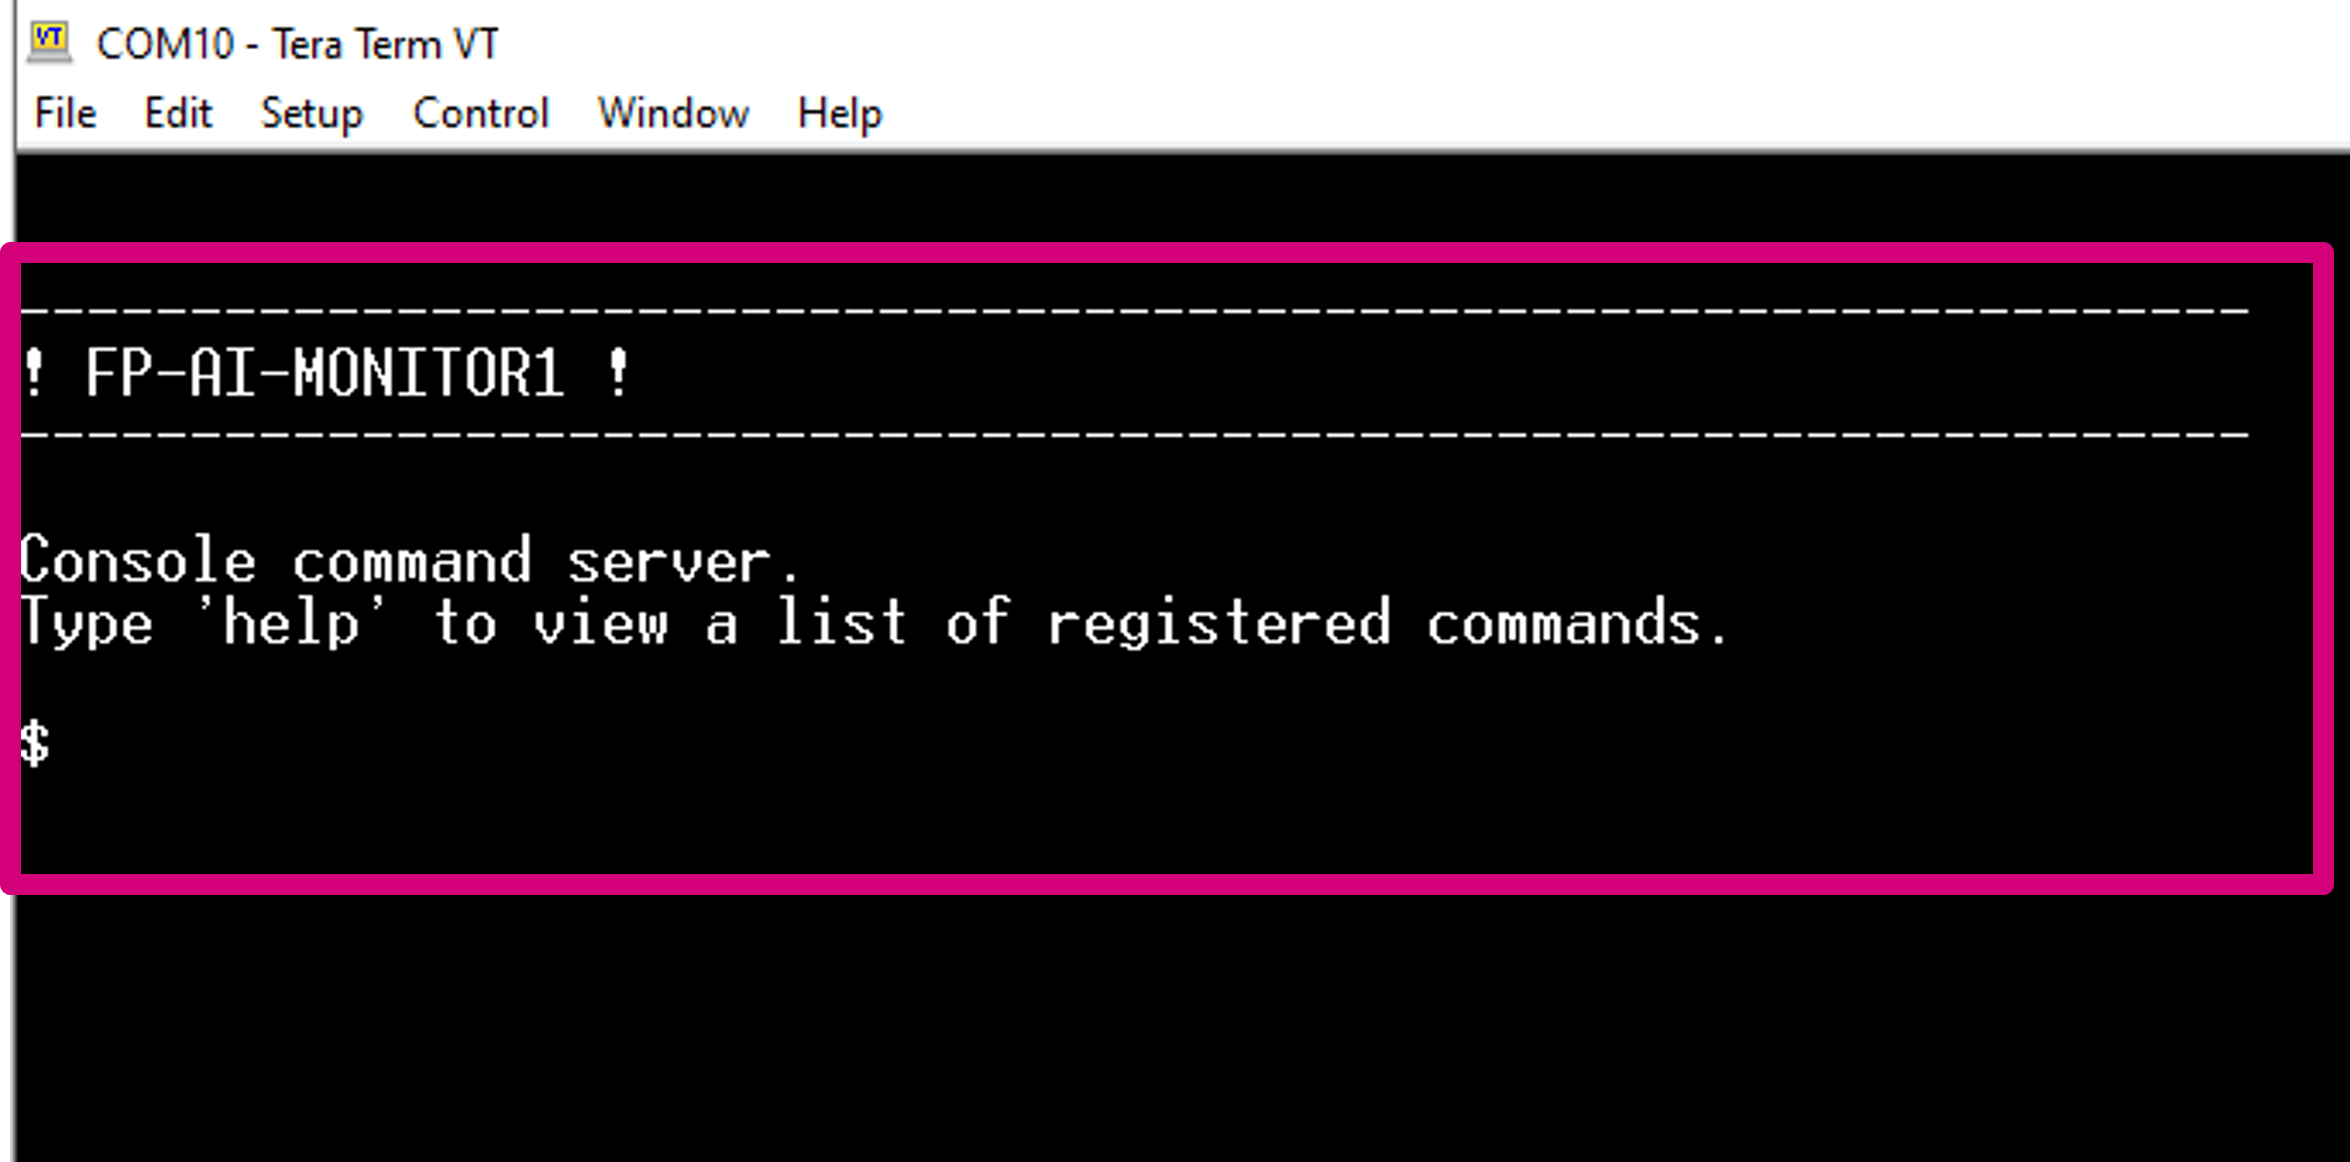 FP-AI-MONITOR1 Console Welcome Message